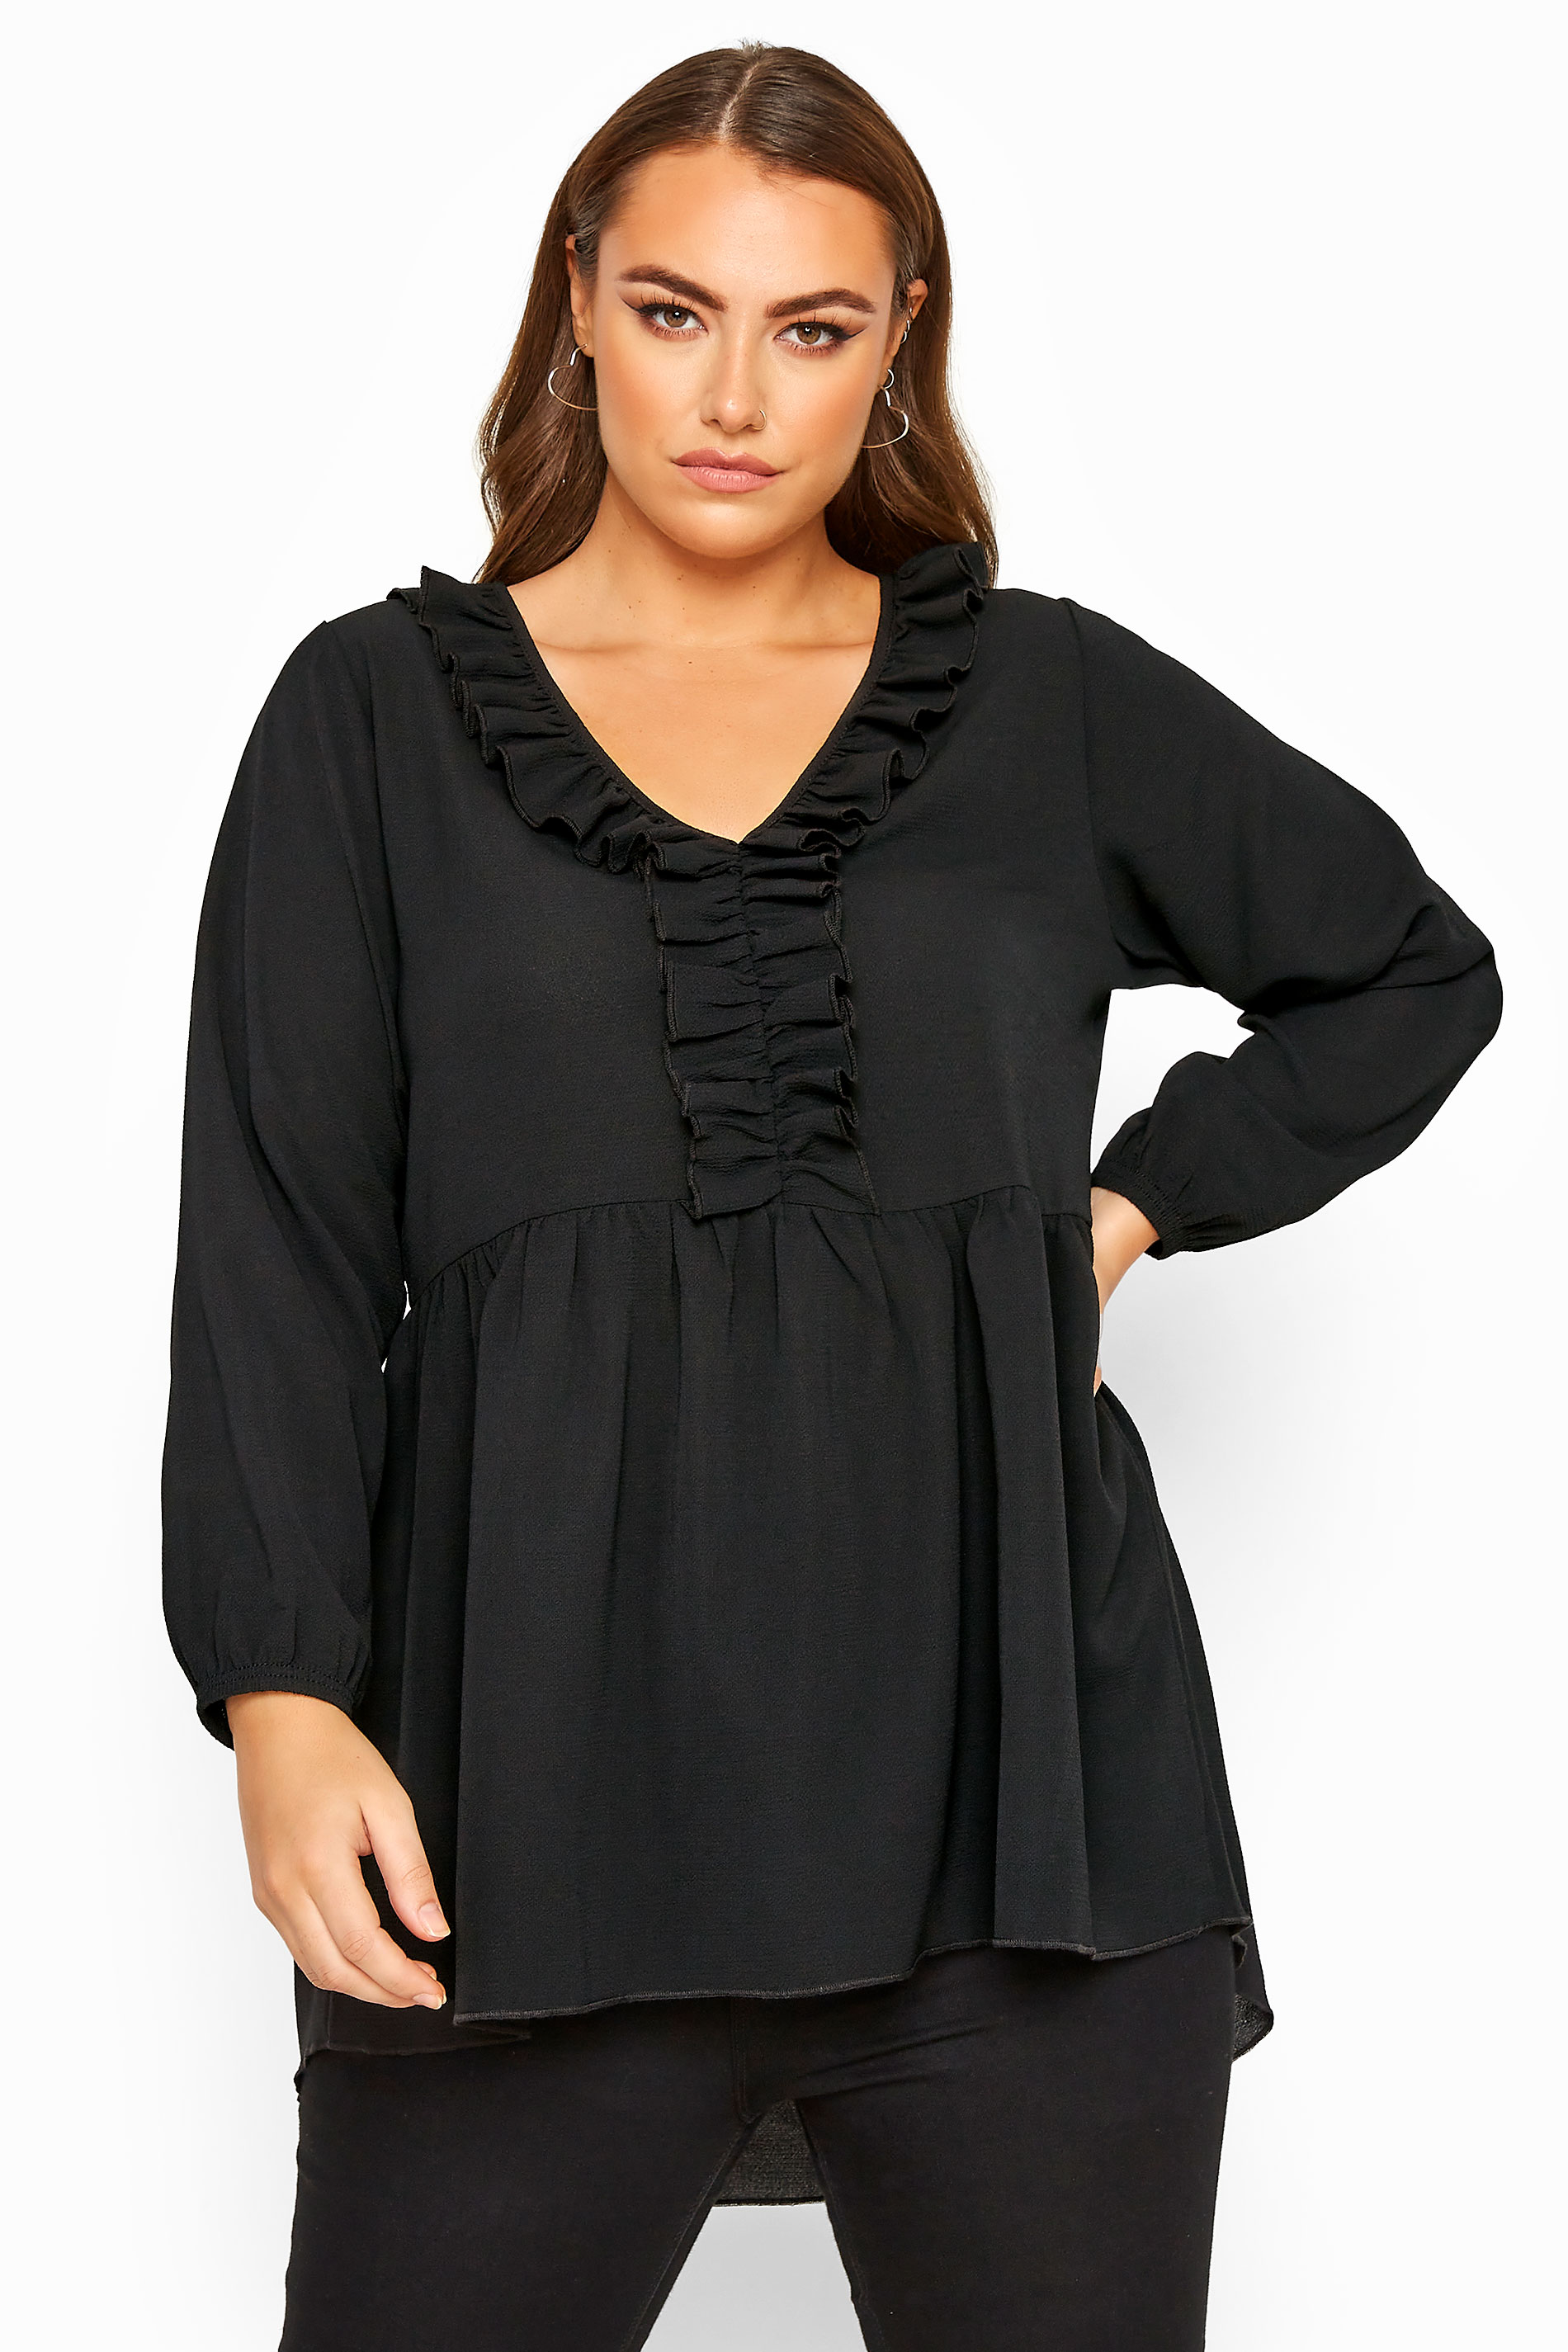 LIMITED COLLECTION Black Frill Blouse | Yours Clothing